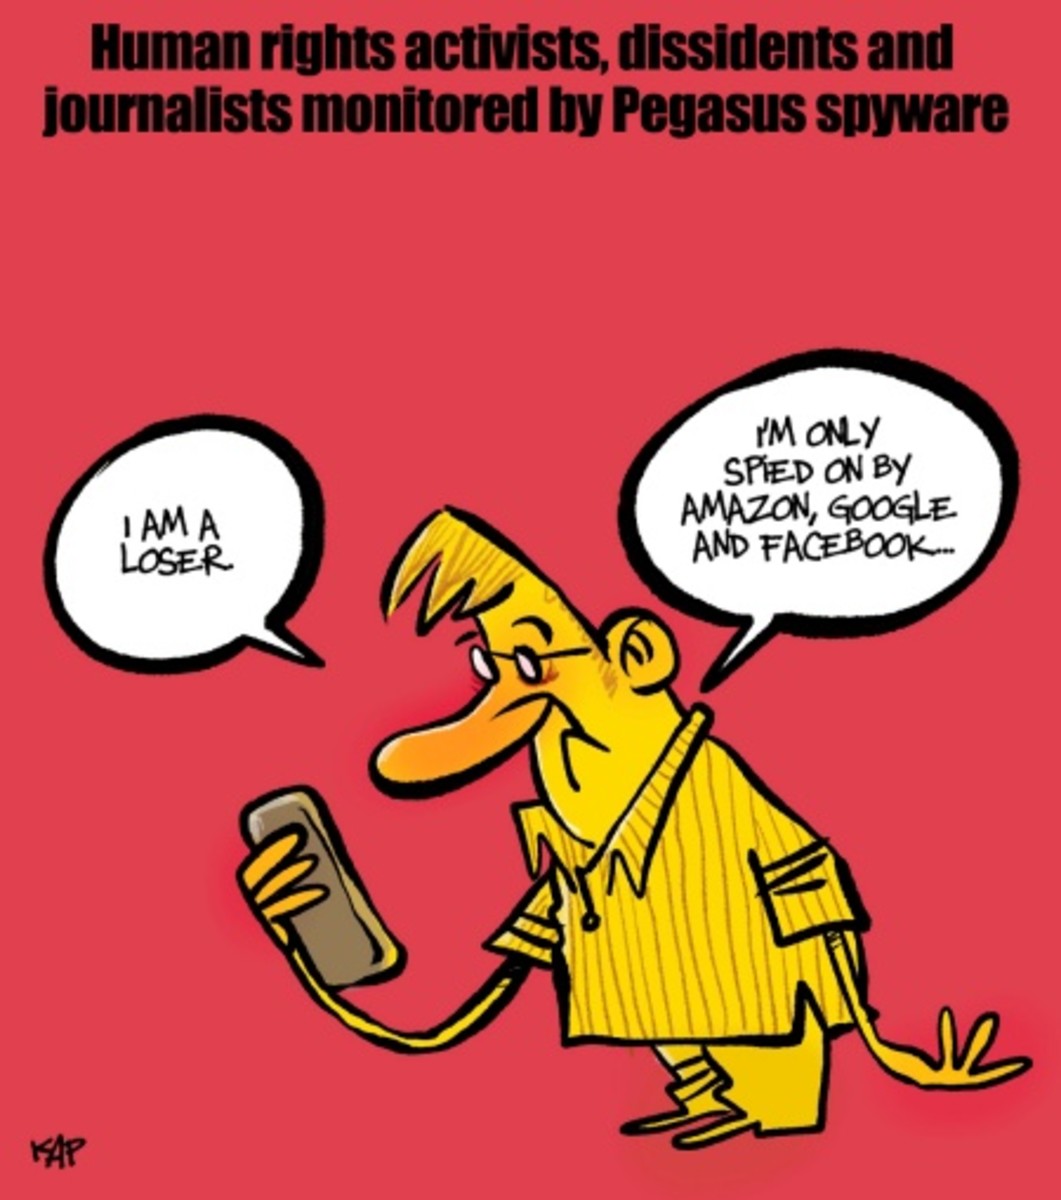 Pegasus Government Use Crosses the Moral Boundary "I'm a Loser... I'm only spied on by Amazon, Google and Facebook..."